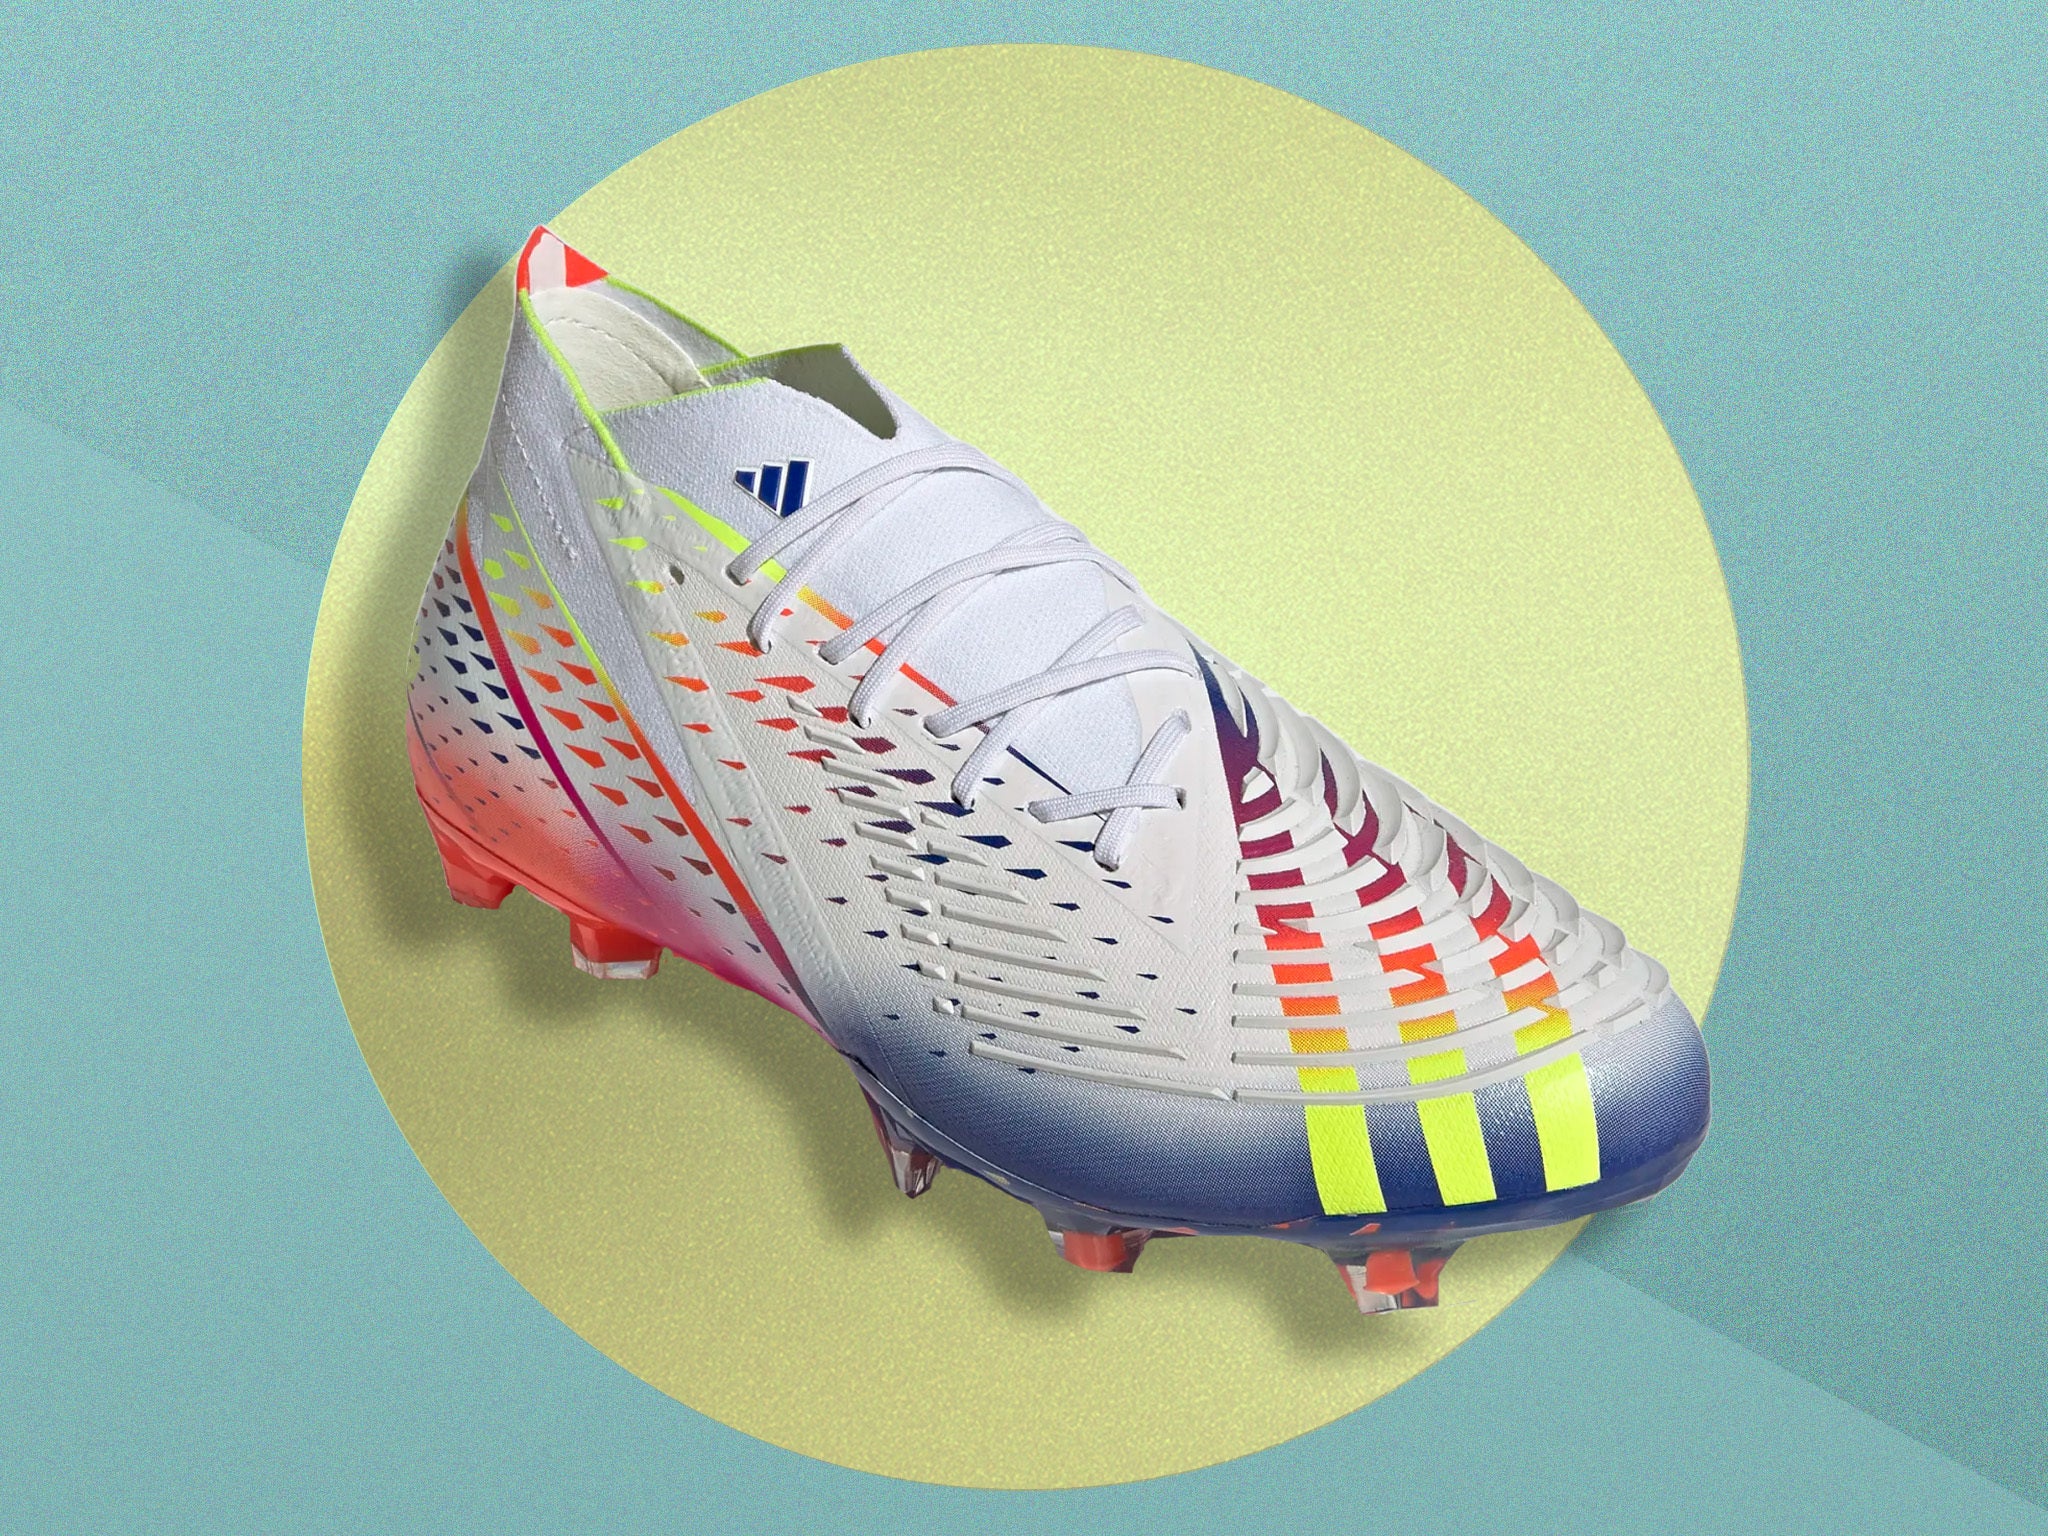 Onrustig knecht Speciaal Adidas World Cup boots: Buy the Al Rihla football pack | The Independent